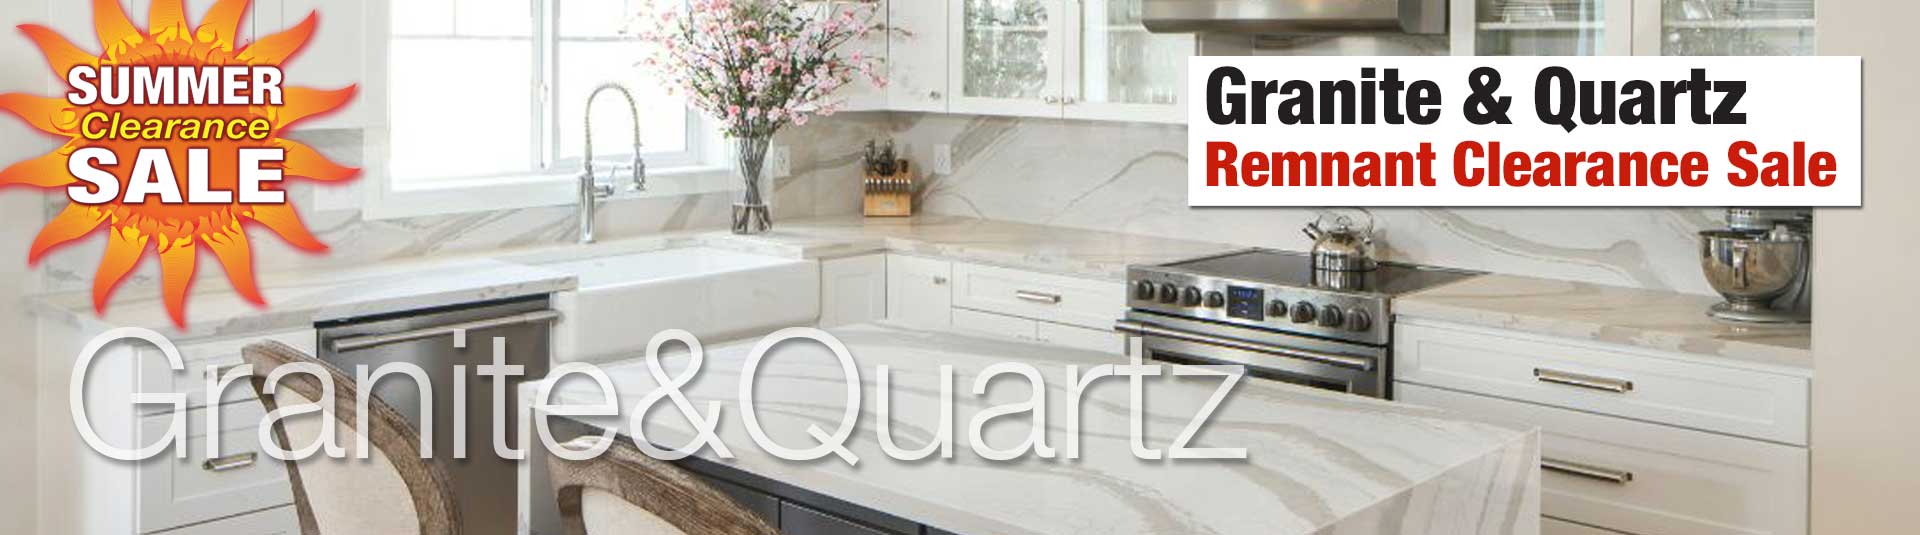 Granite & Quartz Remnant Clearance Sale going on now at Benson Stone Company!